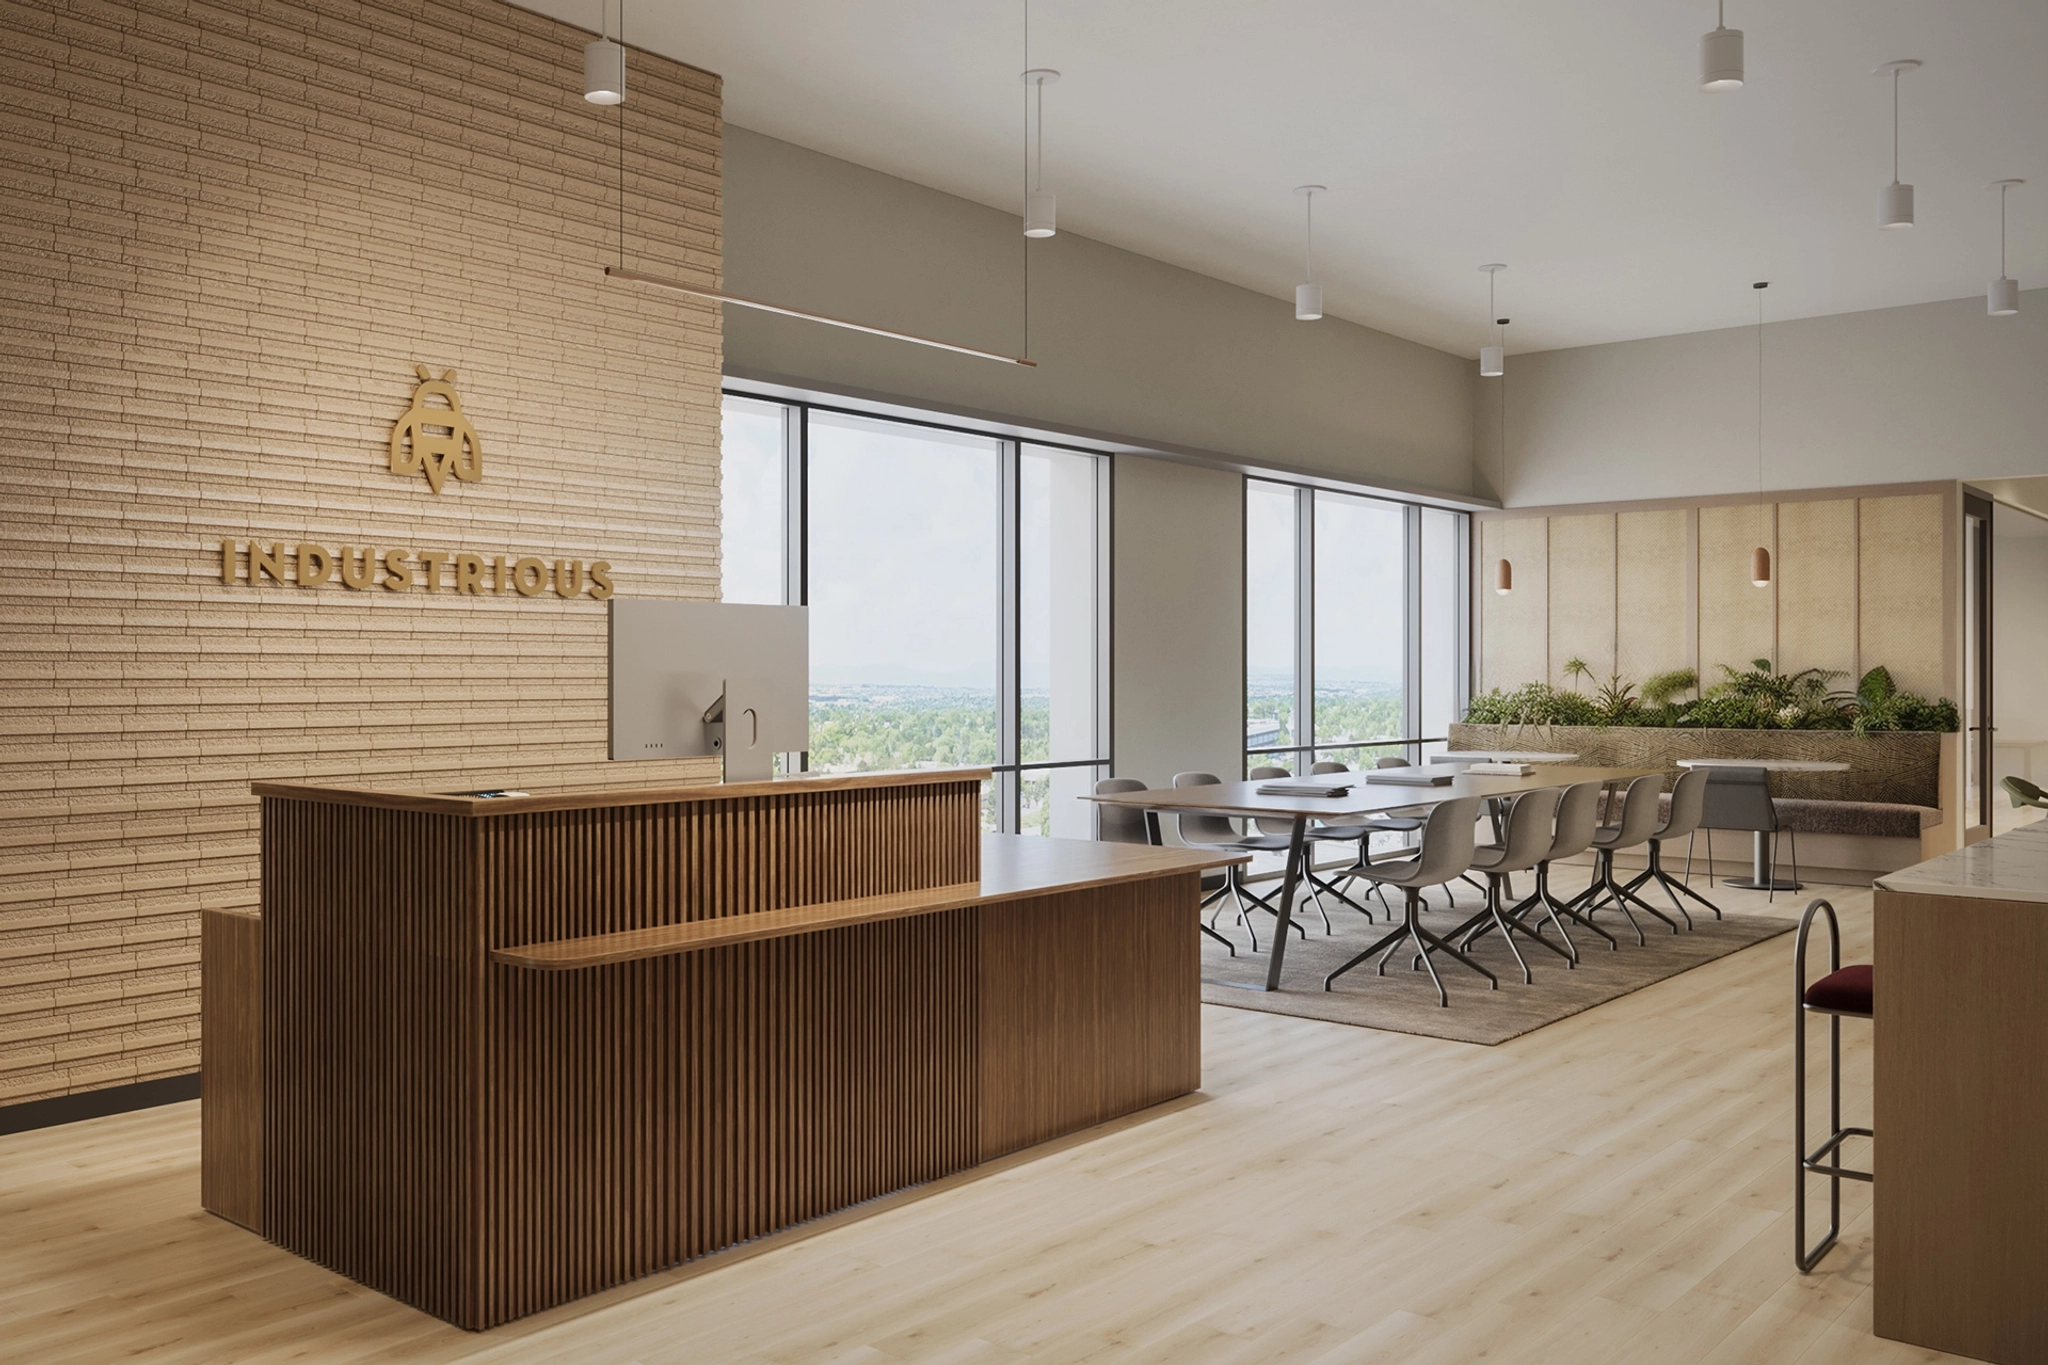 A rendering of a reception area in a modern office with a meeting room.